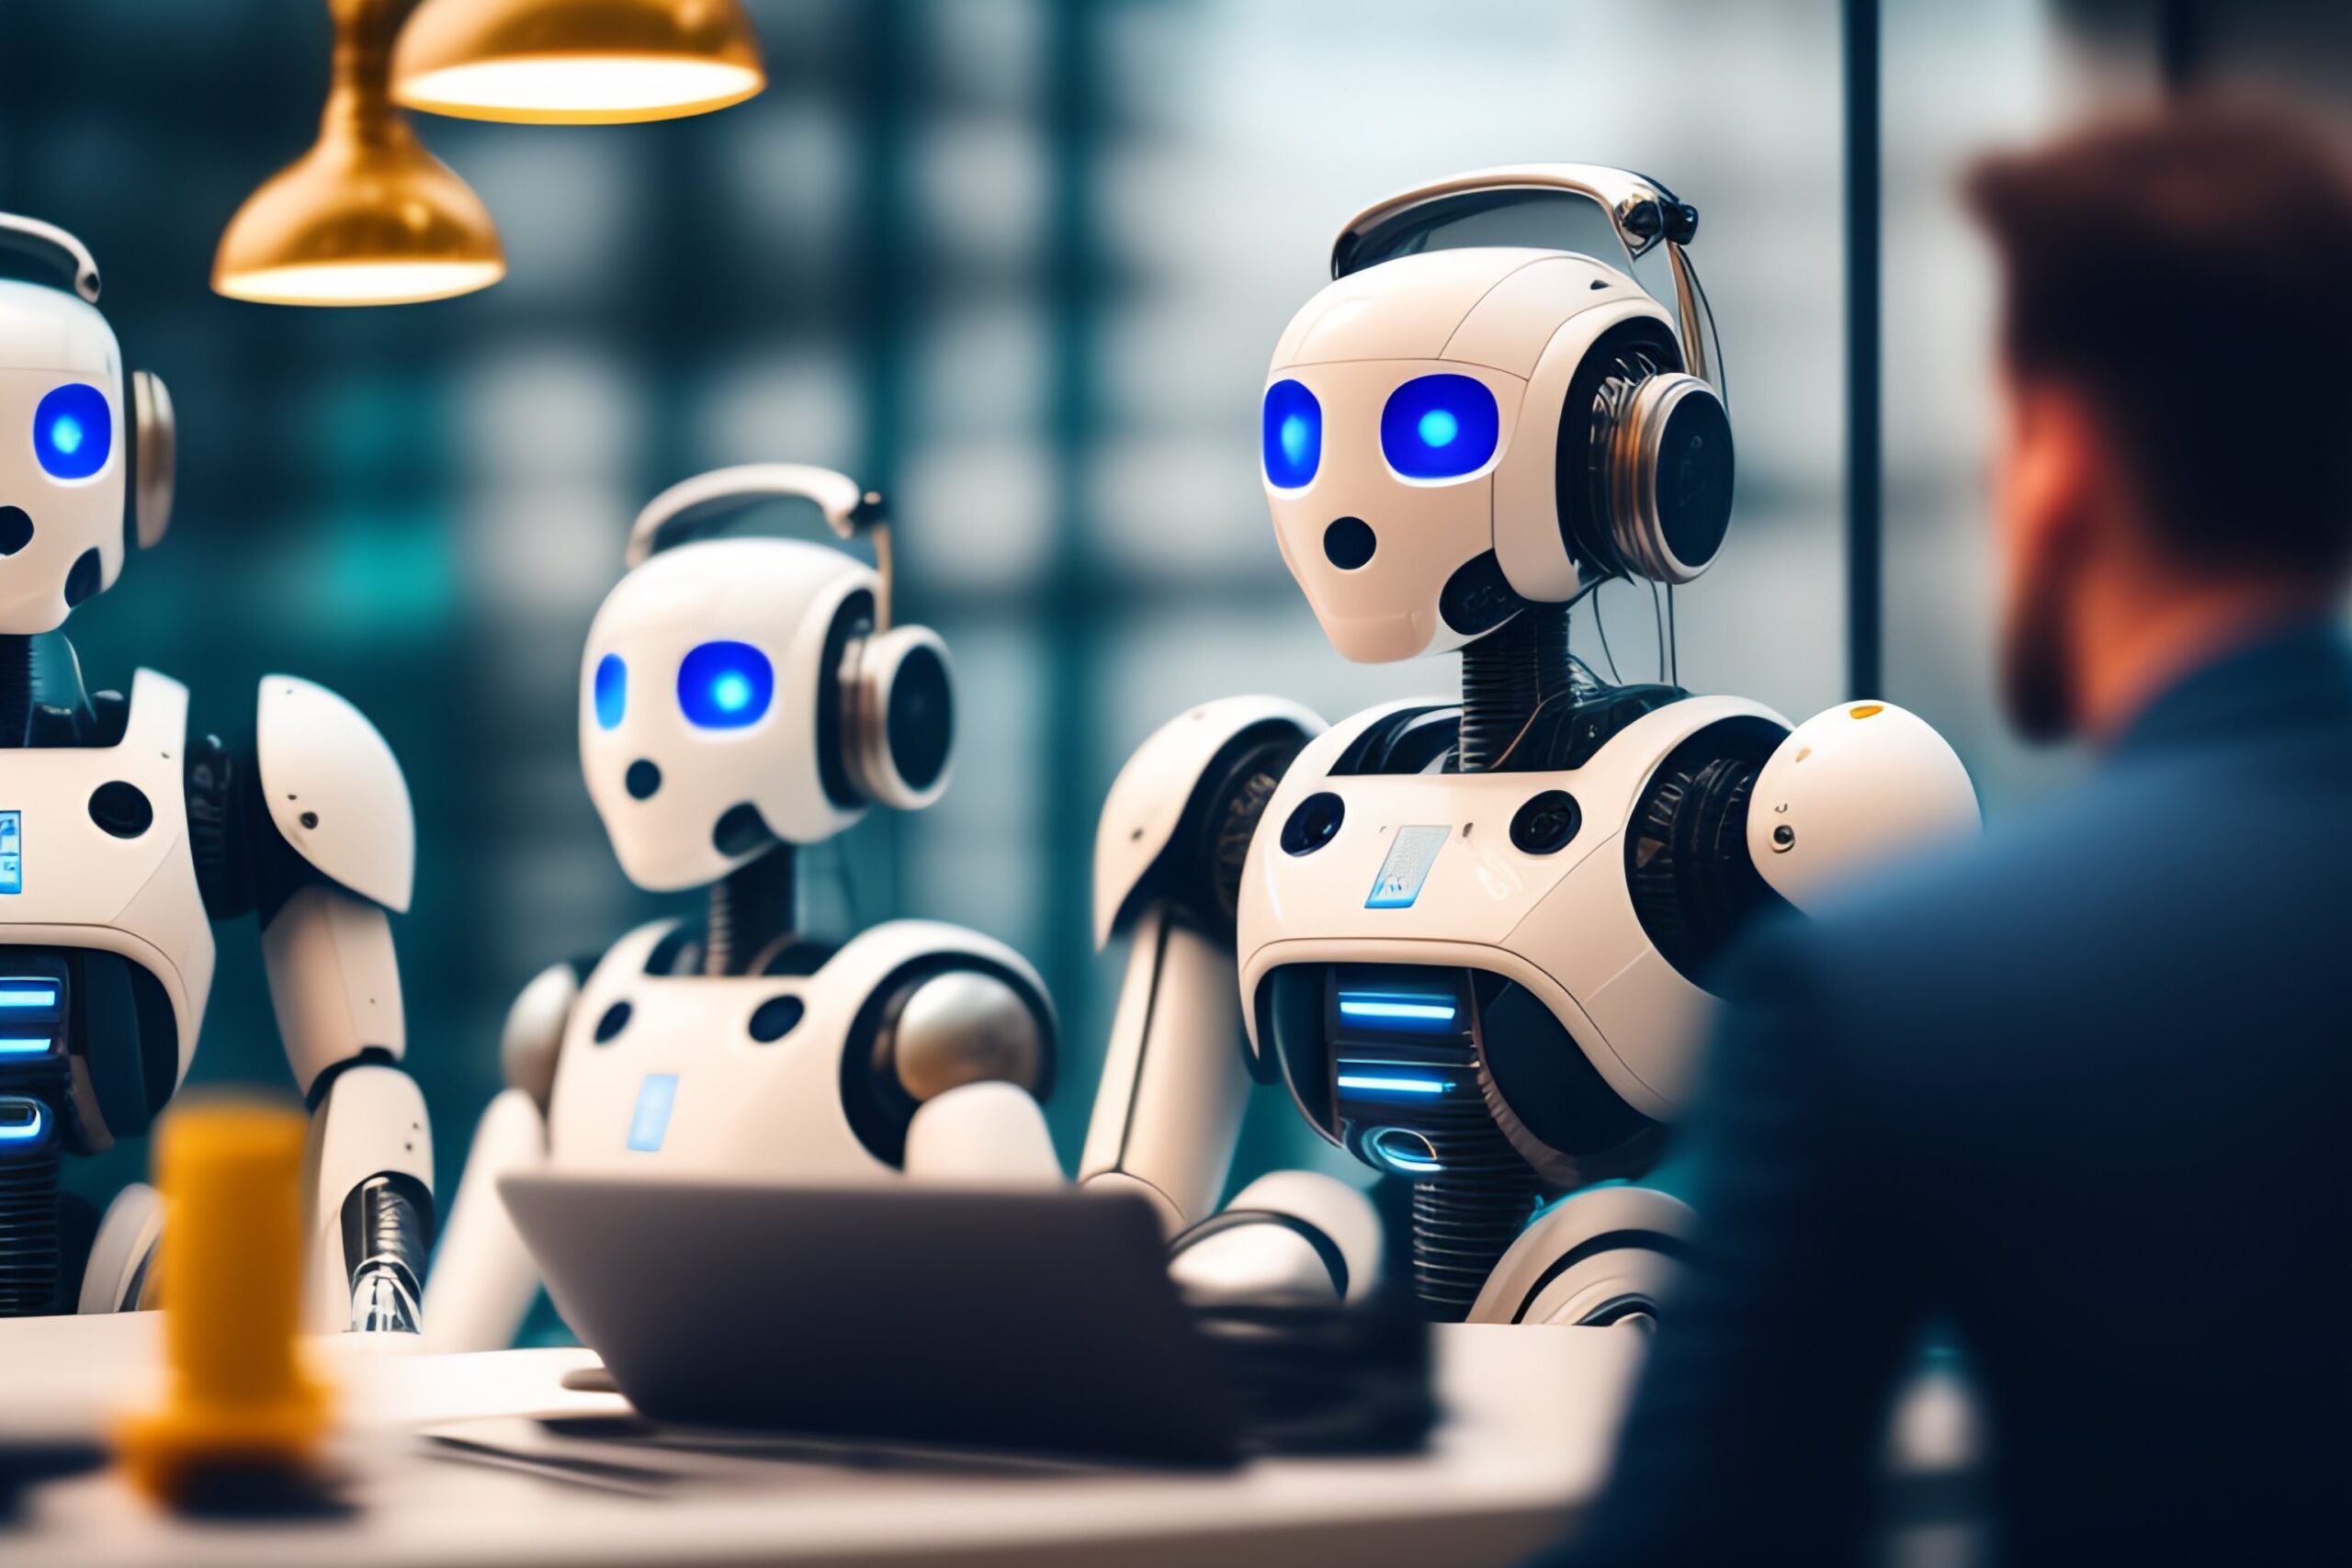 The key takeaway from the web page is that AI chatbots can be more beneficial and accurate when directed to use information from trusted sources, such as credible websites and research papers. Using specific high-quality data can significantly reduce misinformation and improve the effectiveness of AI chatbots.